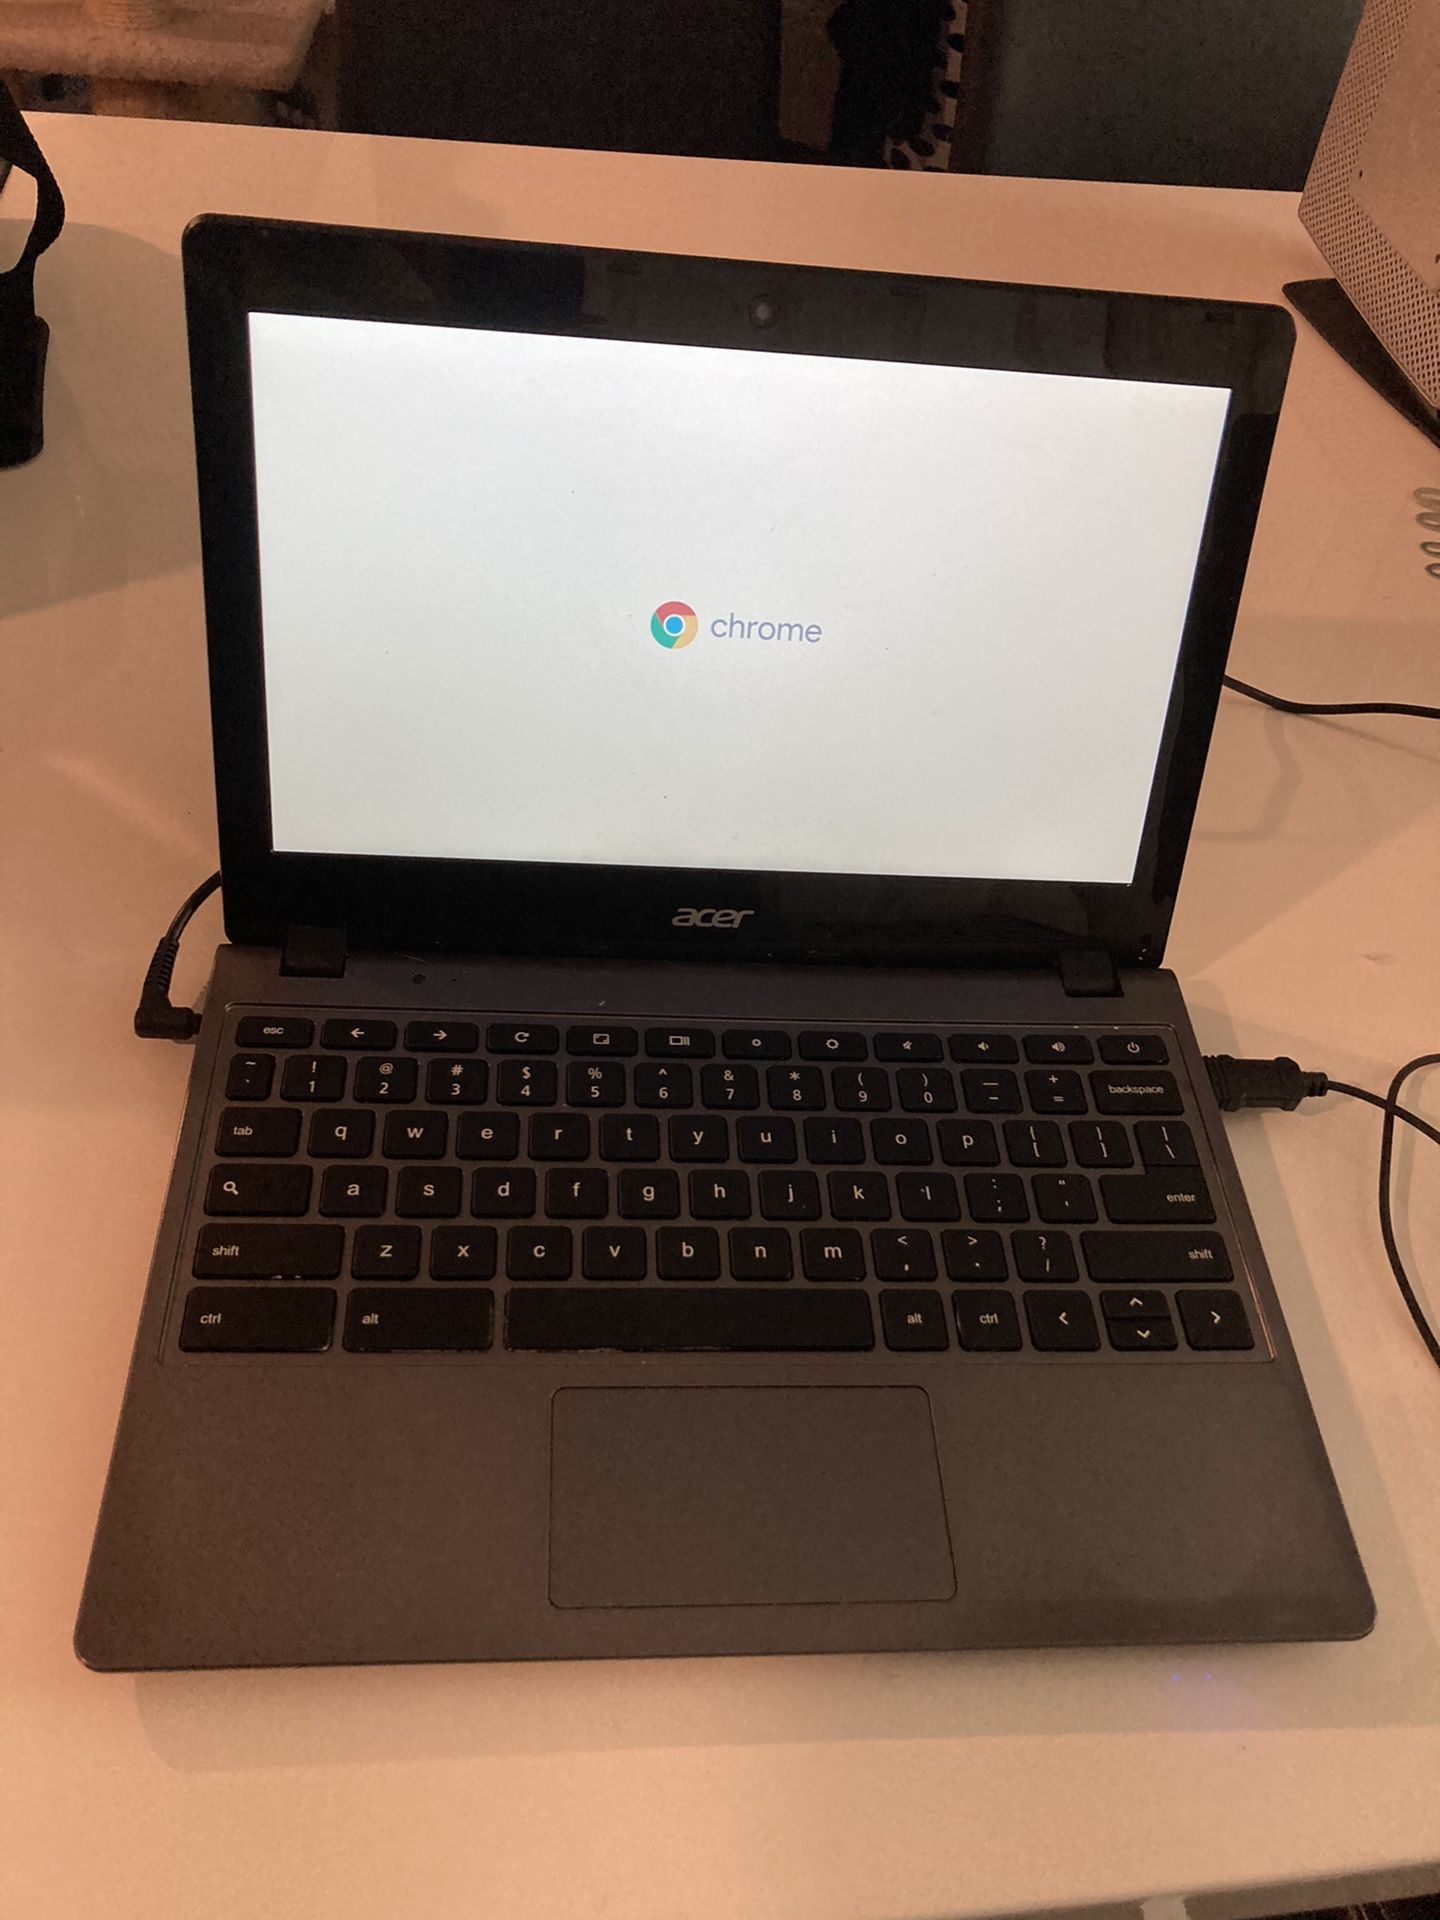 Acer Chomebook C720 - 16 GB SSD